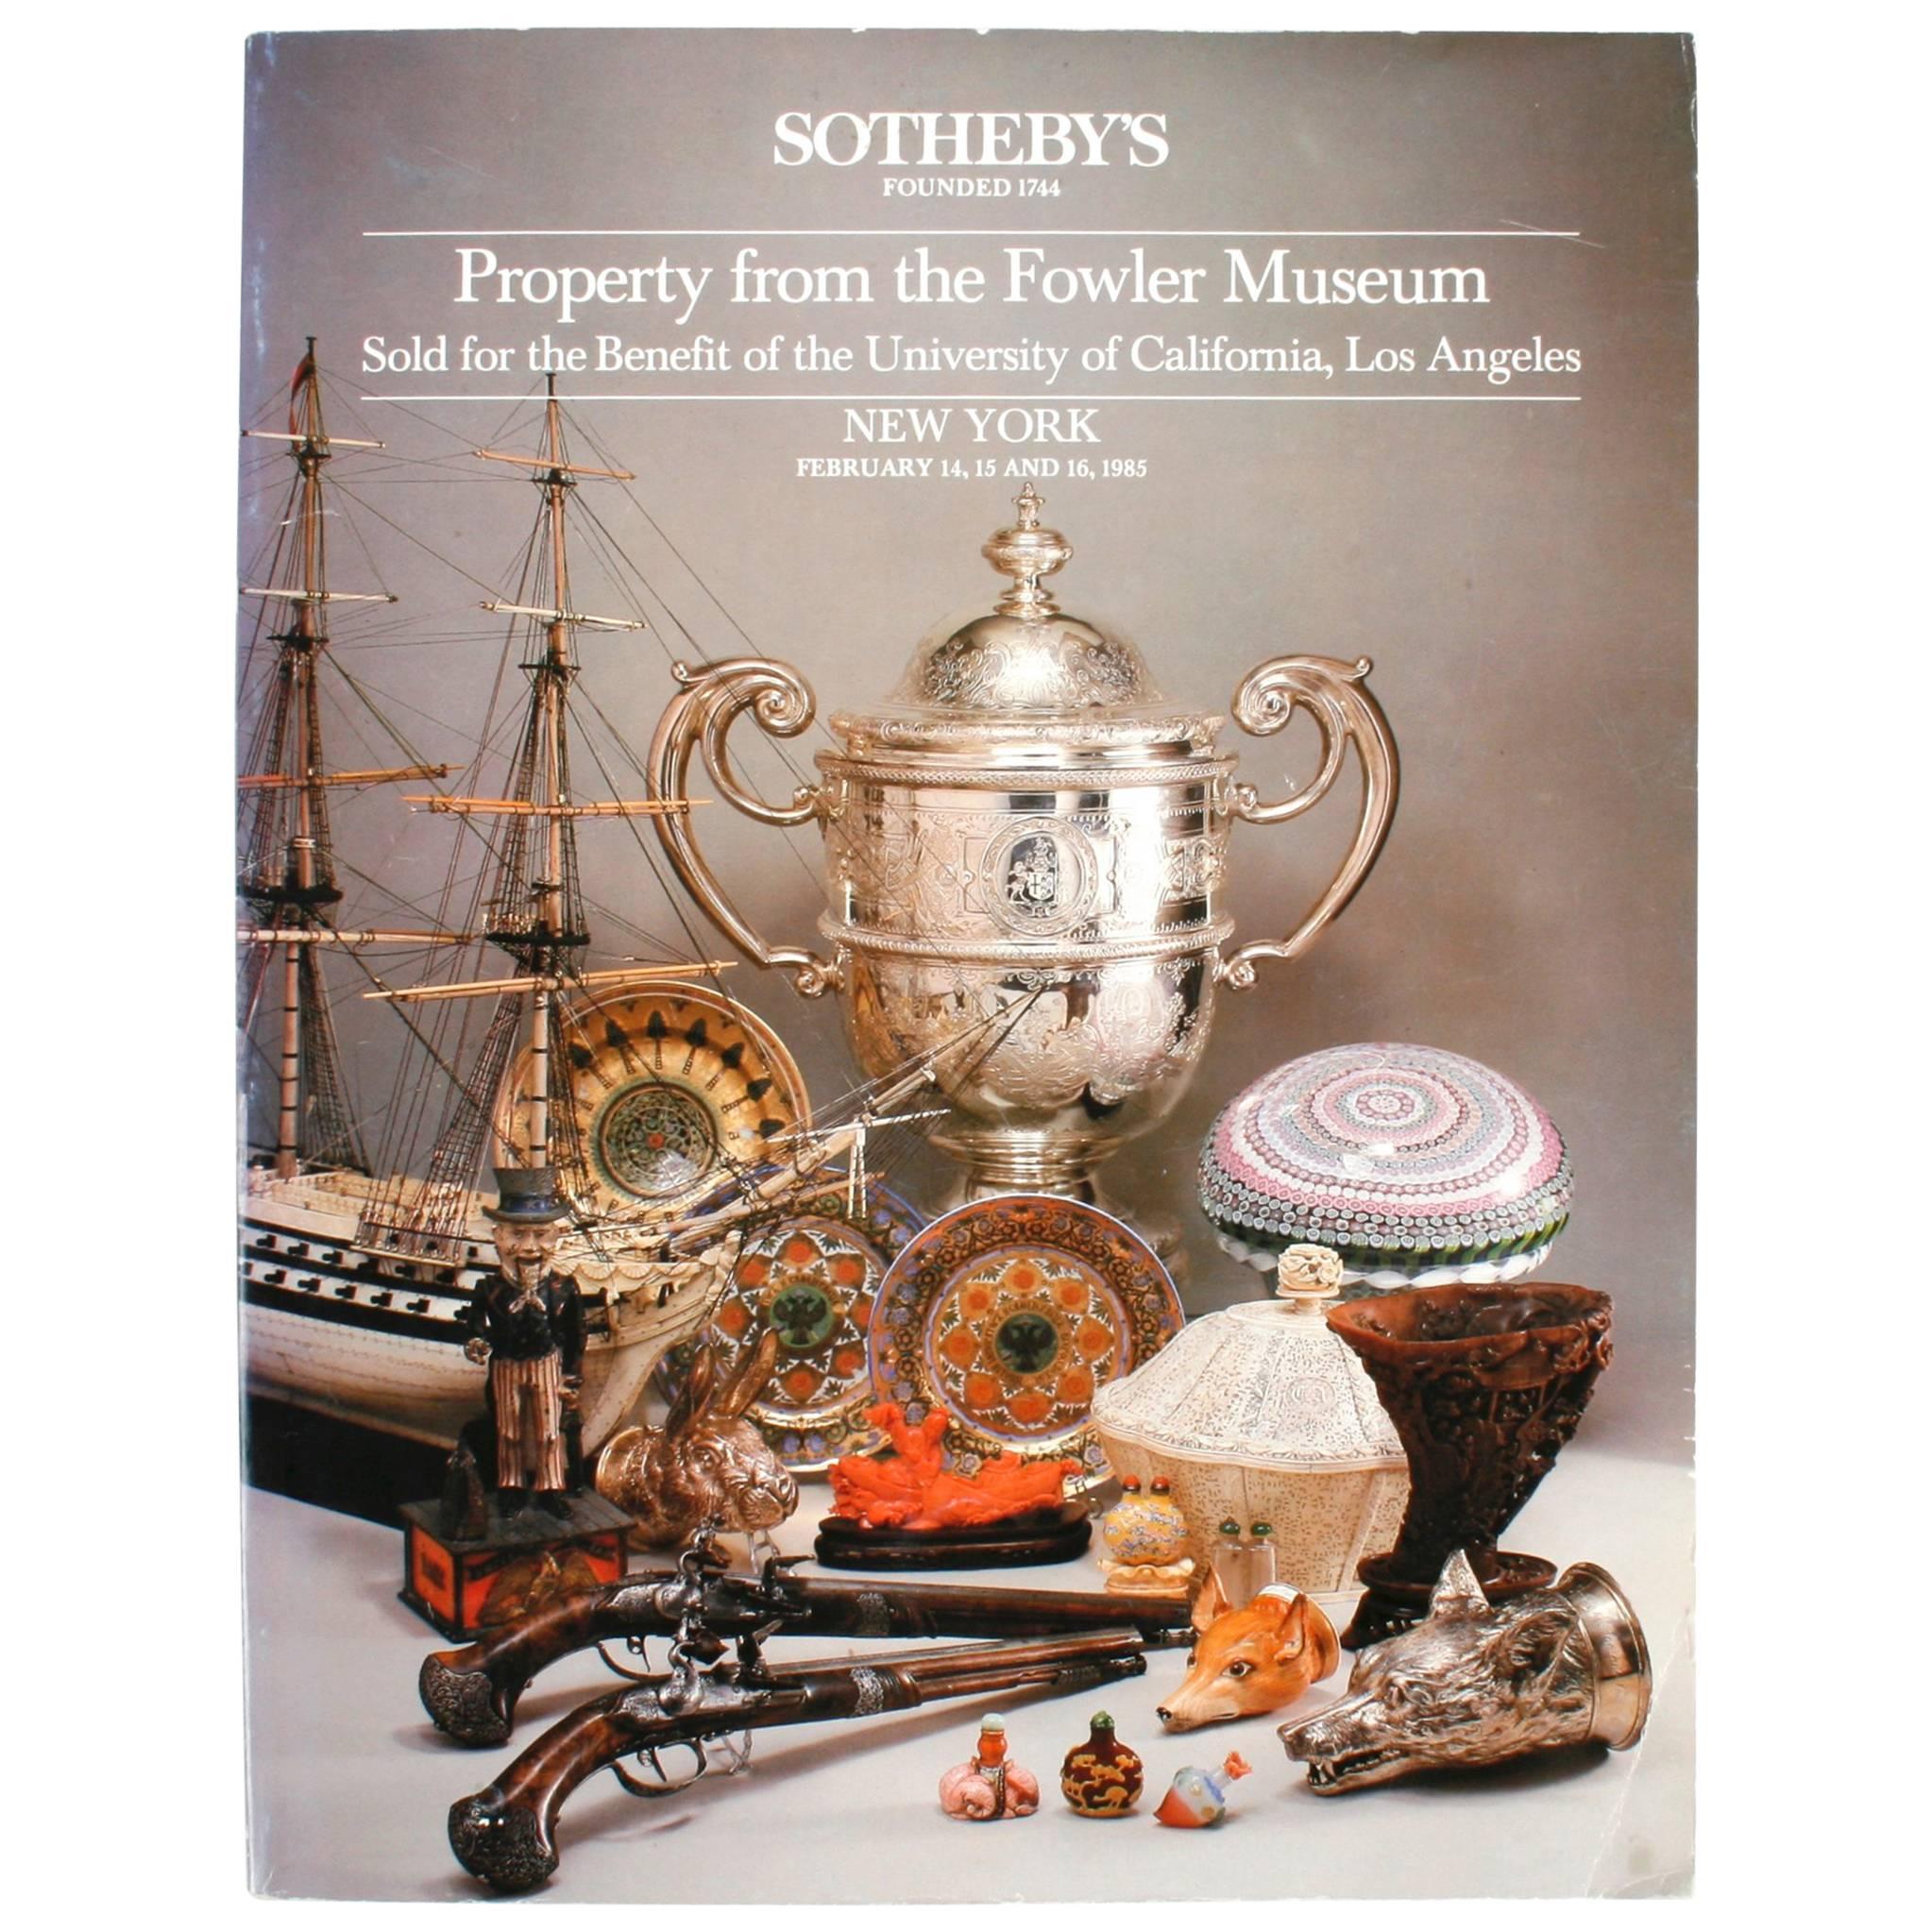 Sotheby's, Property from the Fowler Museum, NY